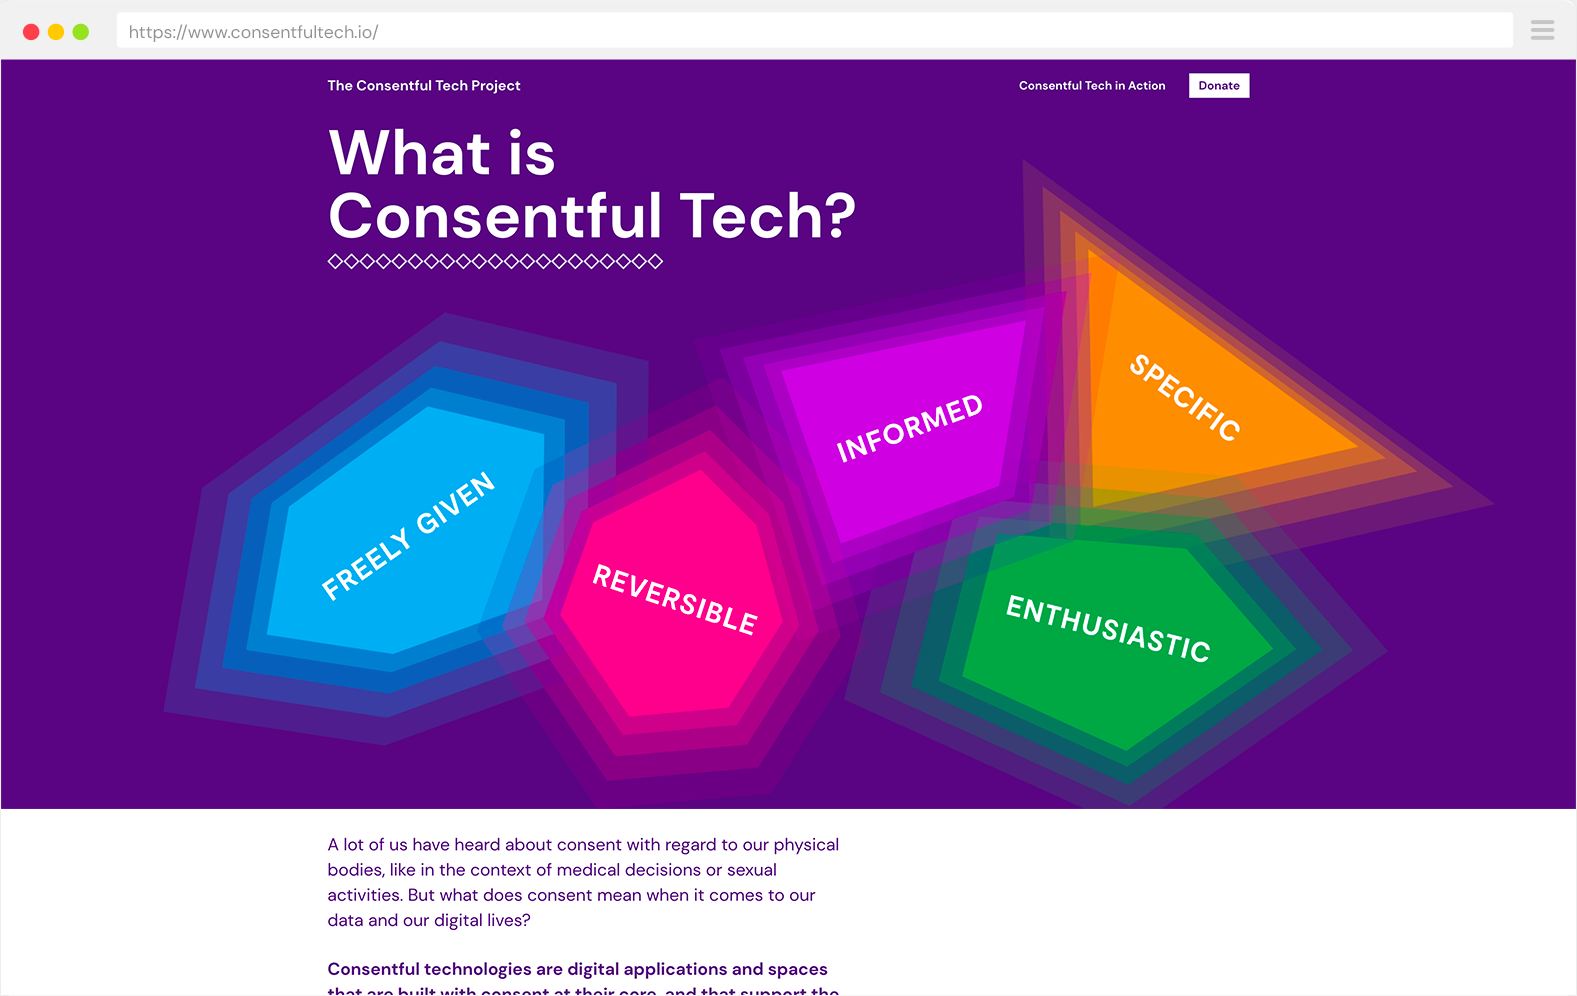 Screenshot from consentfultech.io. The title reads "What is Consentful Tech?" Against a purple background, gem shapes of different colors contain the words "Freely Given, Reversible, Informed, Enthusiastic, and Specific."